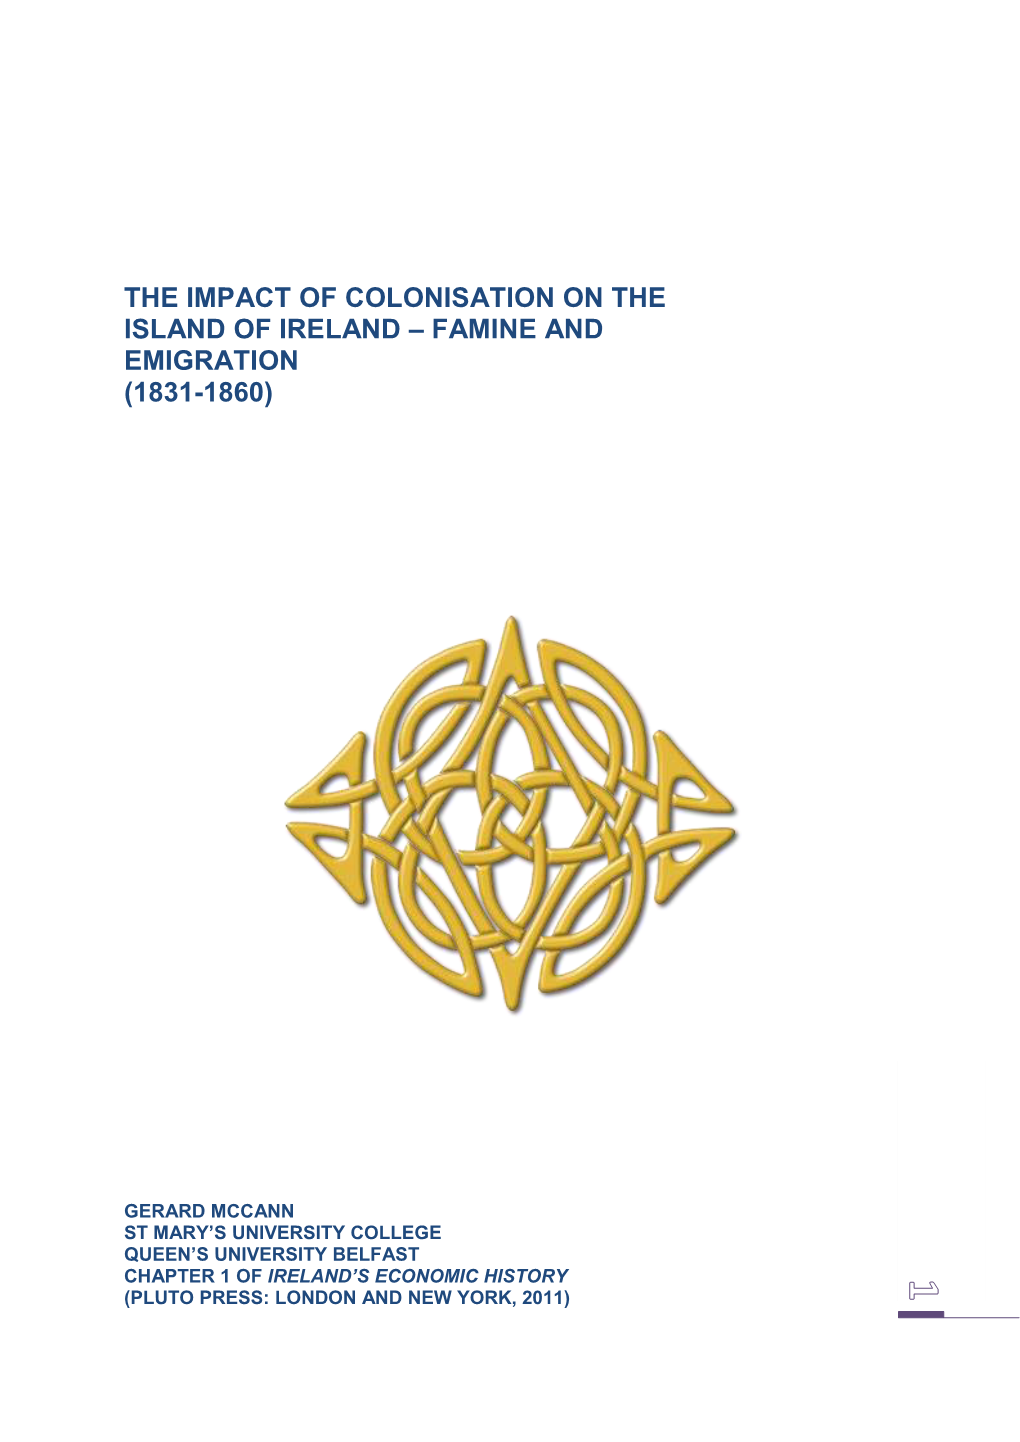 The Impact of Colonisation on the Island of Ireland – Famine and Emigration (1831-1860)